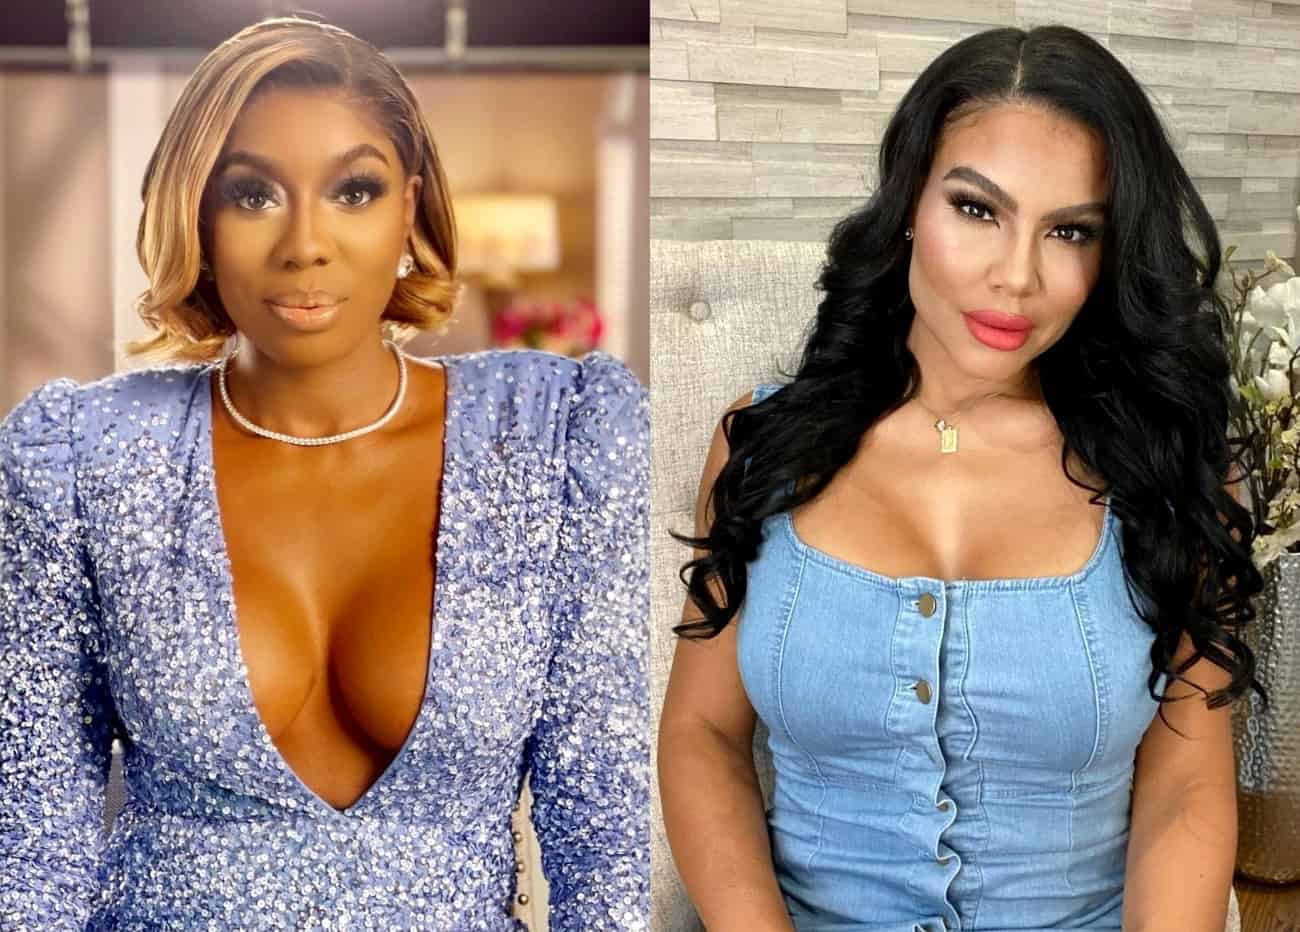 Wendy Osefo Faces Backlash Over “Zen Wen” Nickname as RHOP Costar Mia Thornton Seemingly Shades Her Candle Line